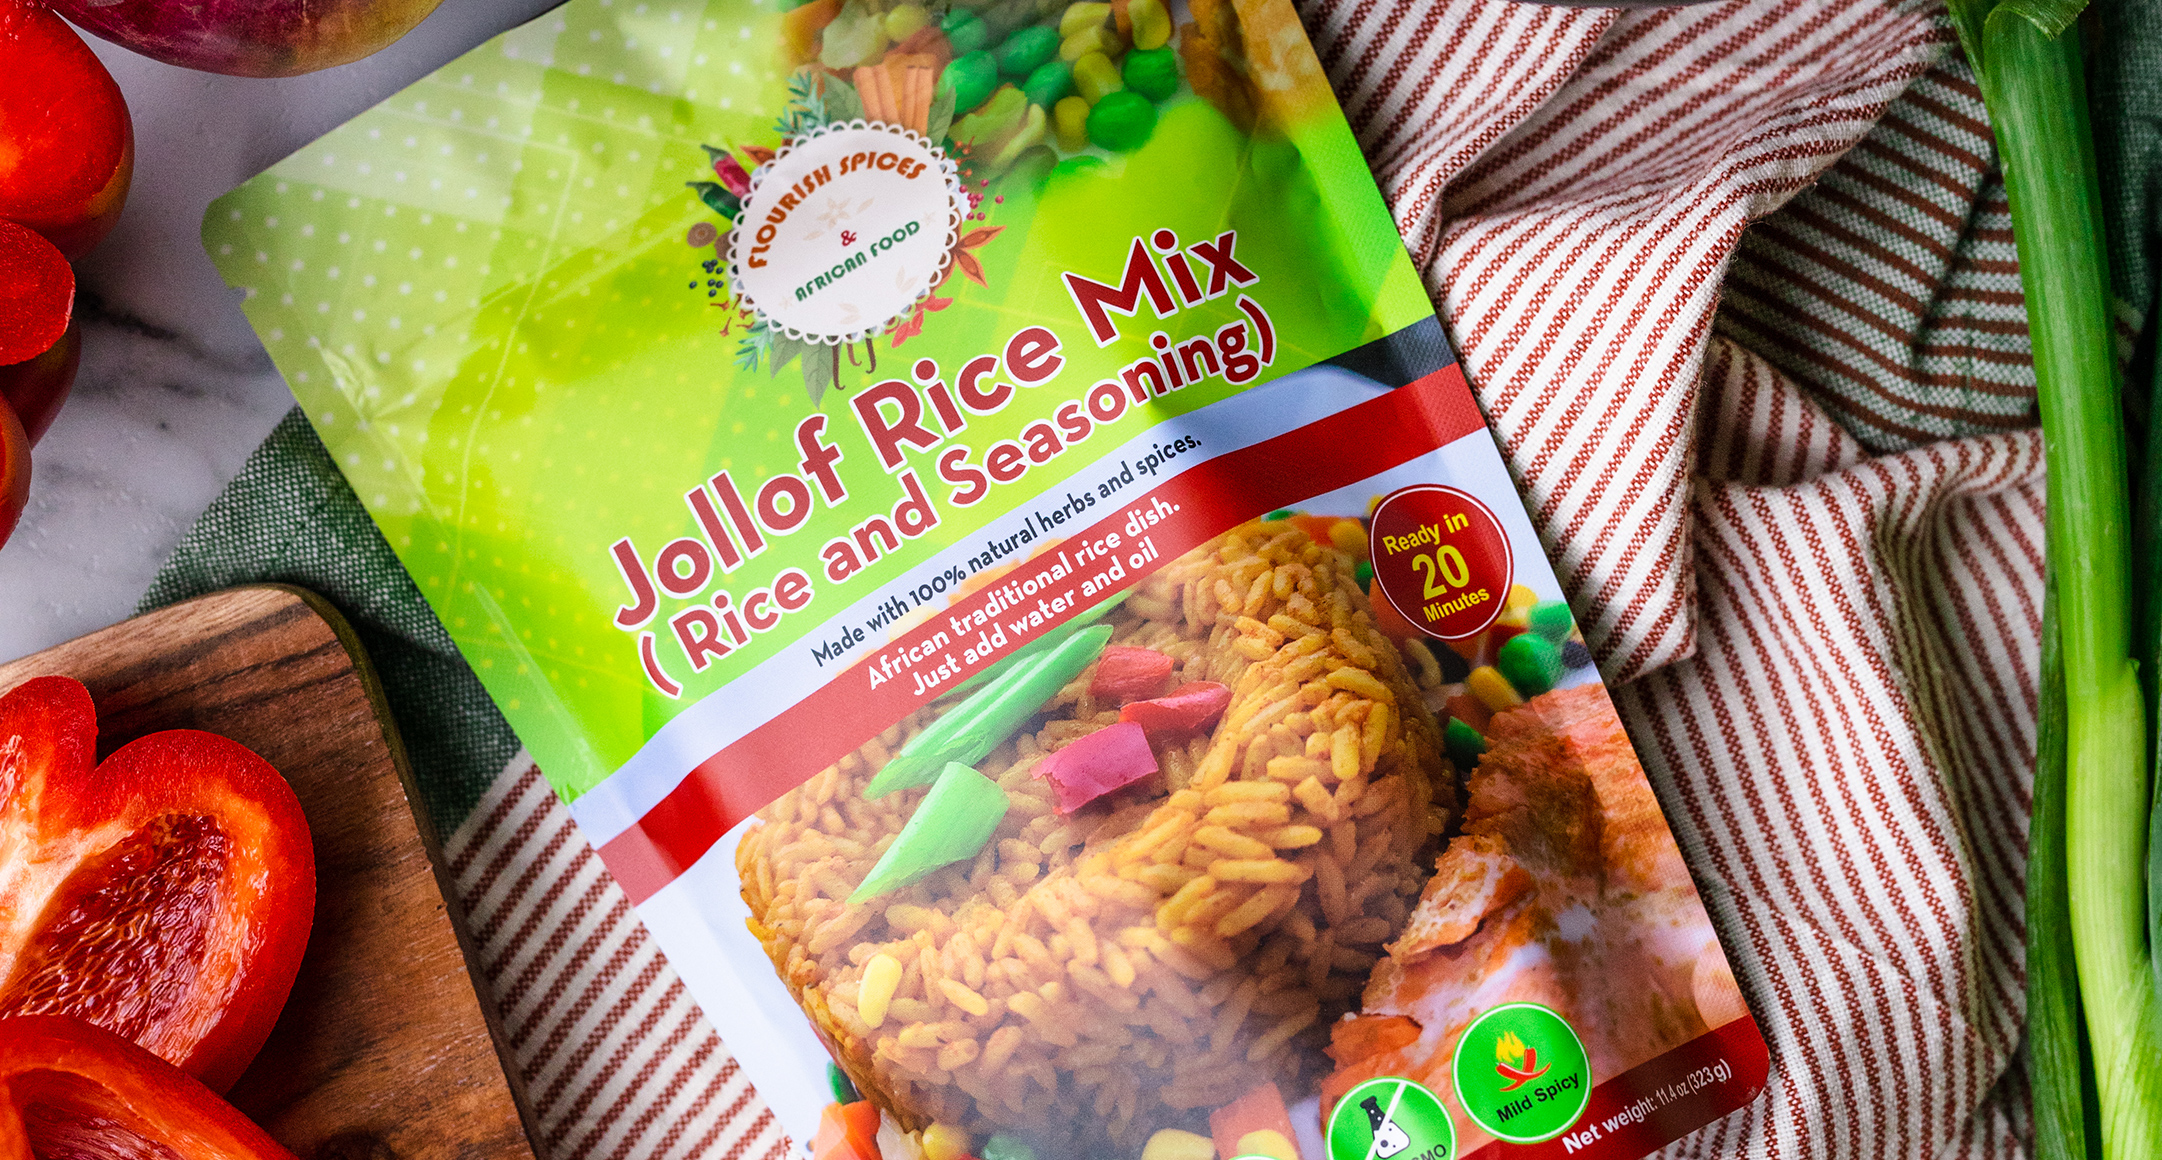 A colorful package of jollof rice mix laying on striped fabric. 